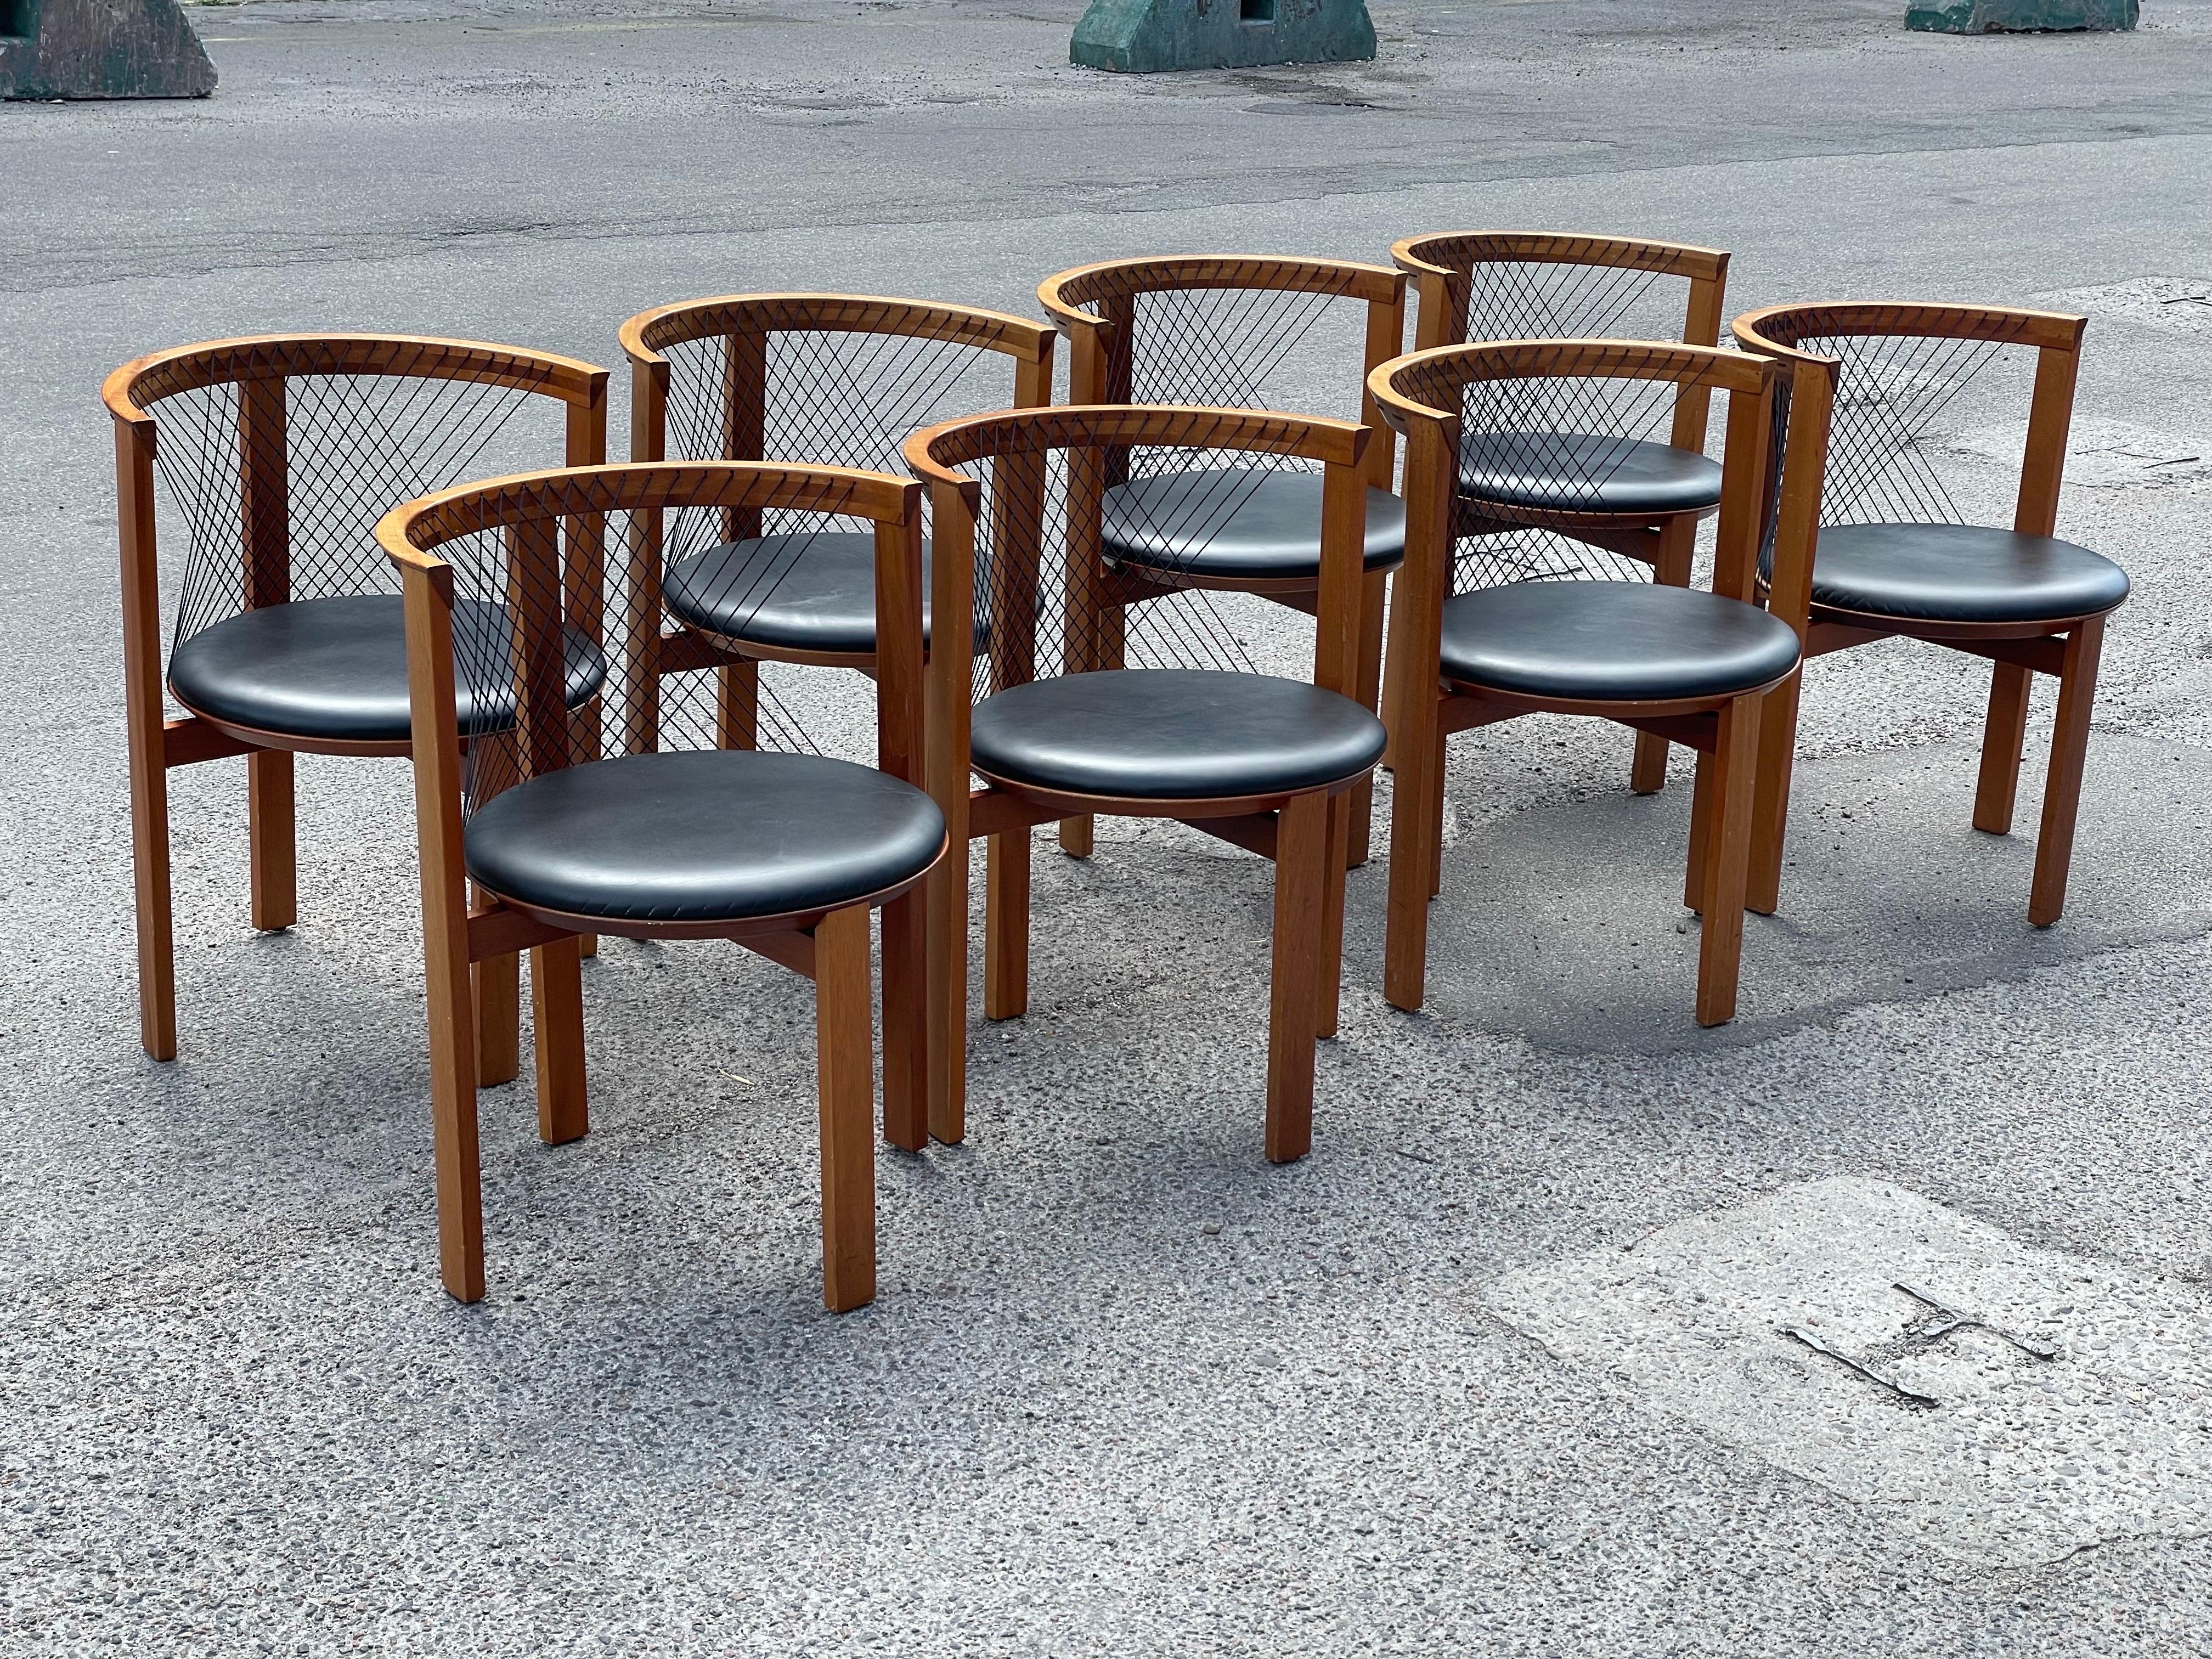 A rare gem for discerning collectors and design enthusiasts: a set of eight exquisite dining chairs designed by Niels Jørgen Haugesen for Tranekaer Denmark in the 1970s. These chairs are a testament to the timeless elegance and impeccable